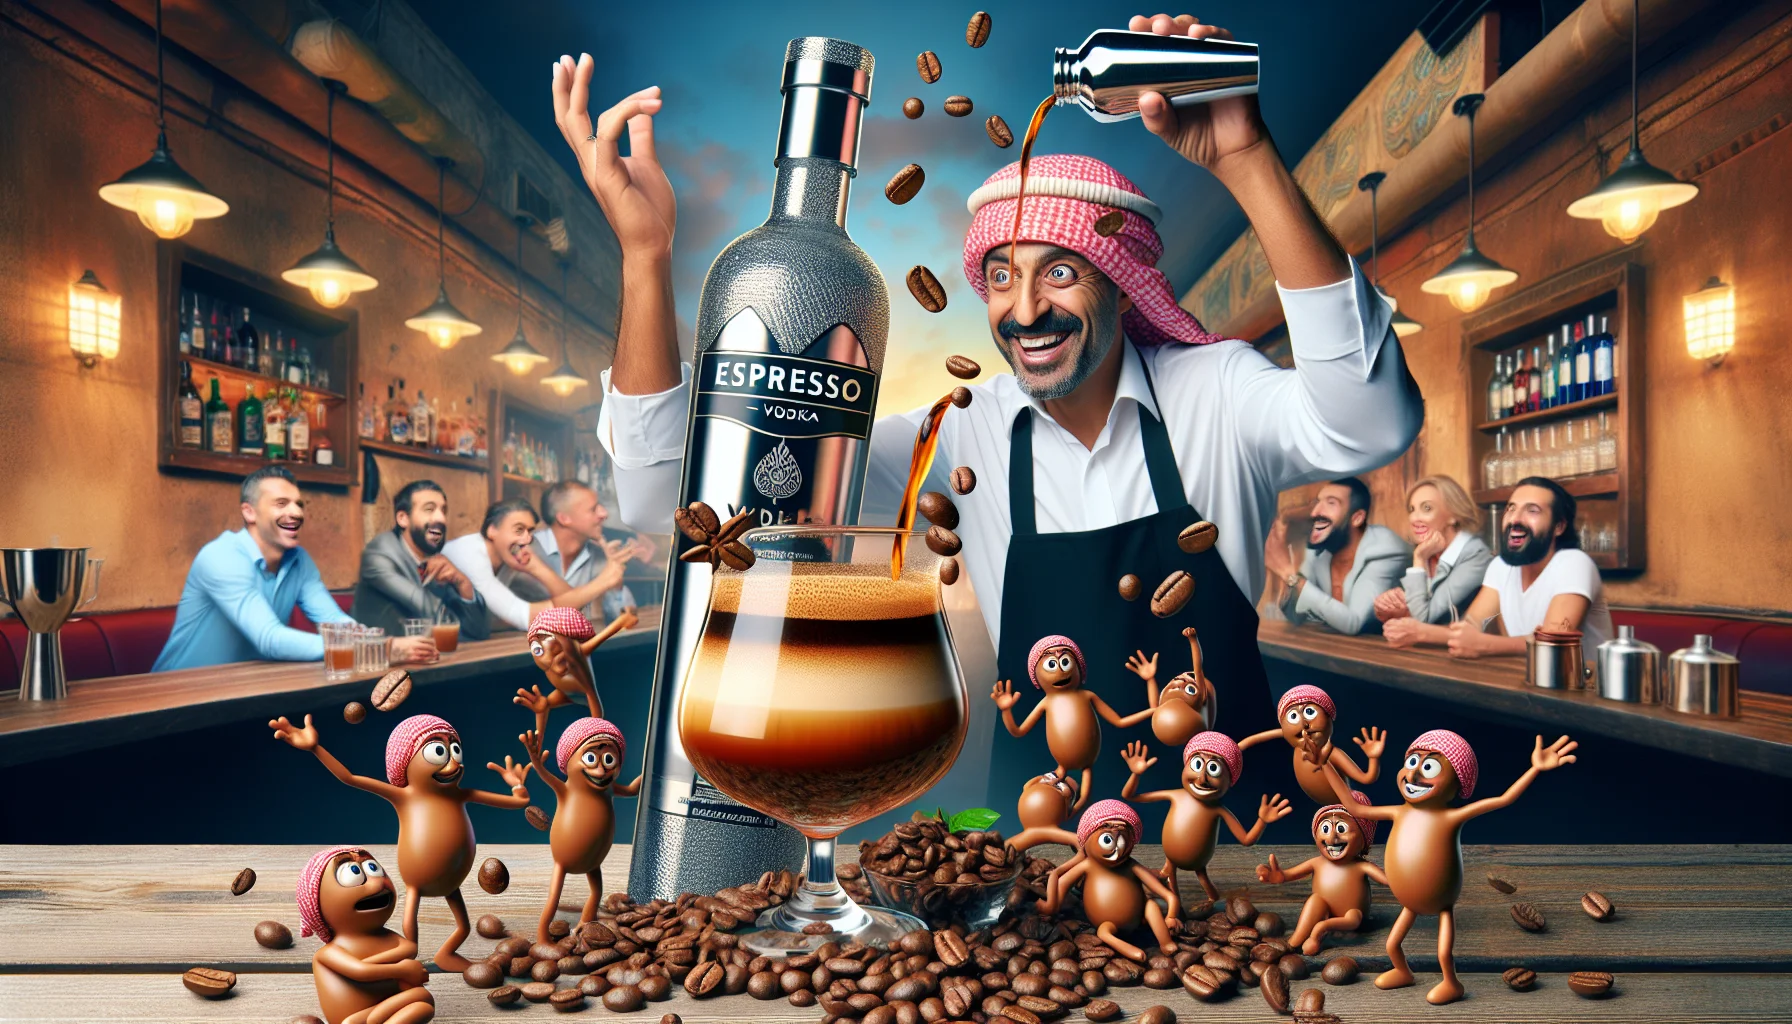 An amusing scene involving espresso vodka ensues. Imagine a charmingly rustic bar with the main focus on a glossy bottle of espresso vodka on the counter. A creative cocktail is being prepared by a skillful Middle-Eastern male bartender, adroitly juggling shakers, and pouring a tantalizing mix of chilled espresso vodka into a fancy glass garnished with coffee beans. Adding to the fun, design a band of animated, anthropomorphic coffee beans lounging by the glass, their tiny arms raised in cheer, exuding a carnivalsque air. In the backdrop, captivated patrons having a good time brings the scene full circle, suggesting merriment and enjoyment.